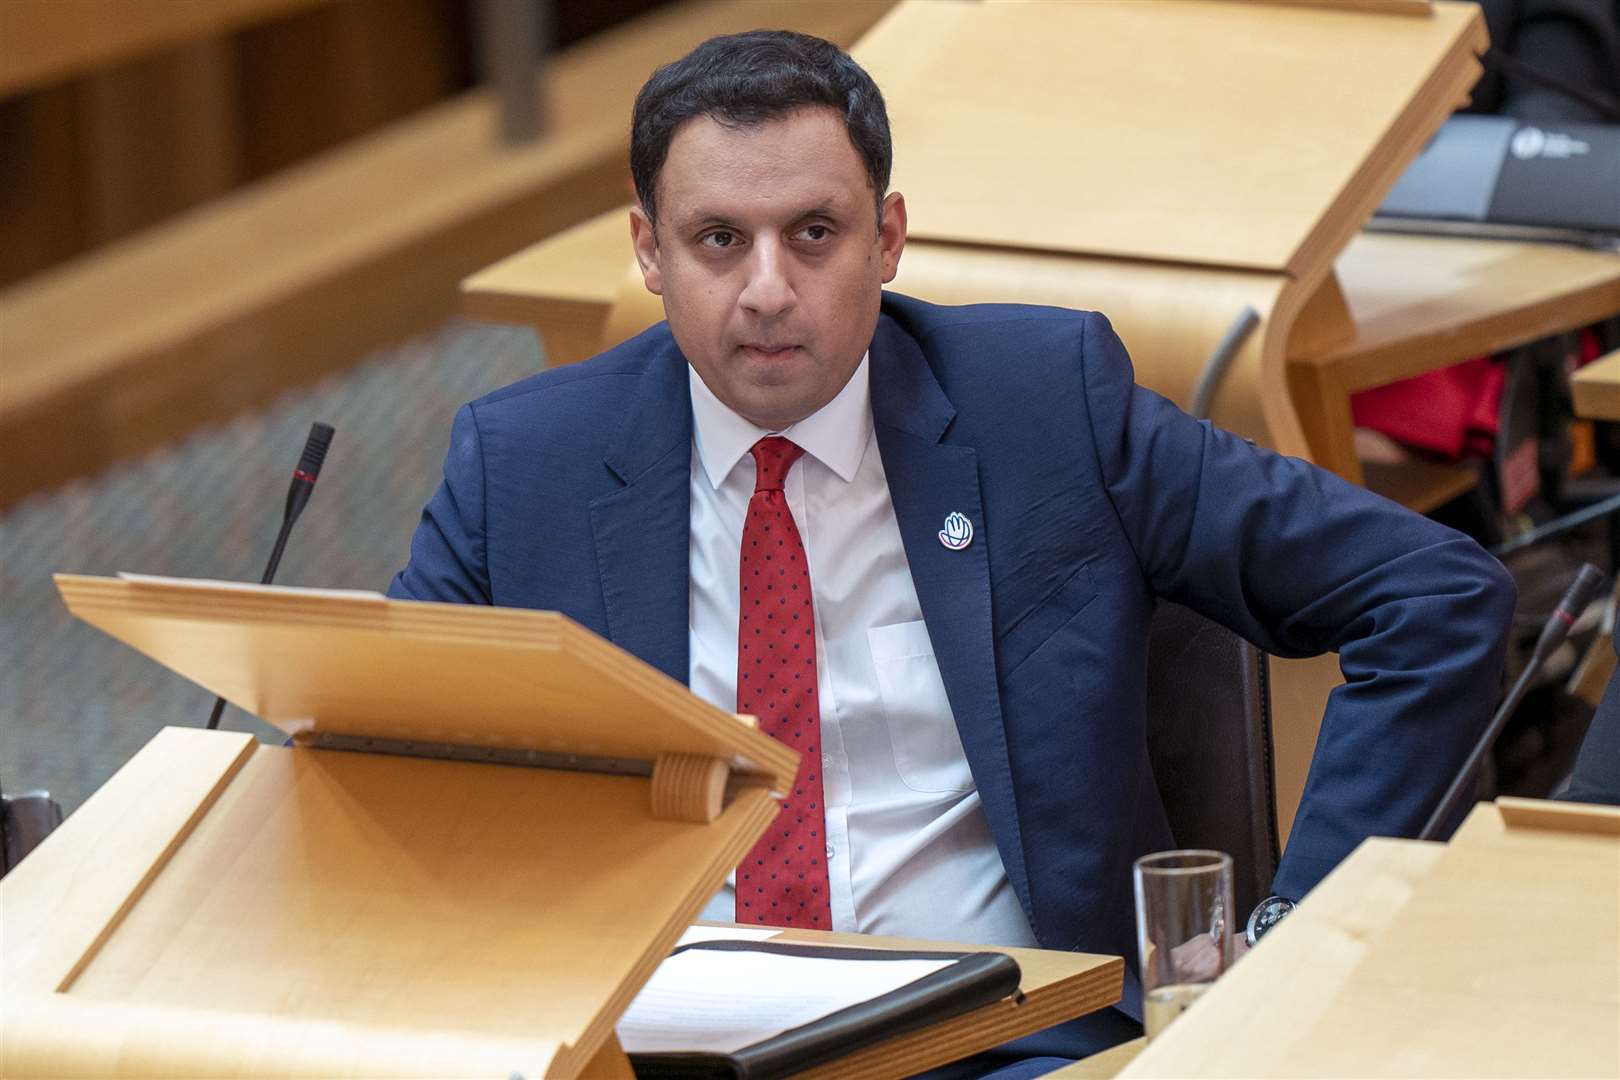 Scottish Labour leader Anas Sarwar during First Minster’s Questions at the Scottish Parliament in Holyrood (Jane Barlow/PA)